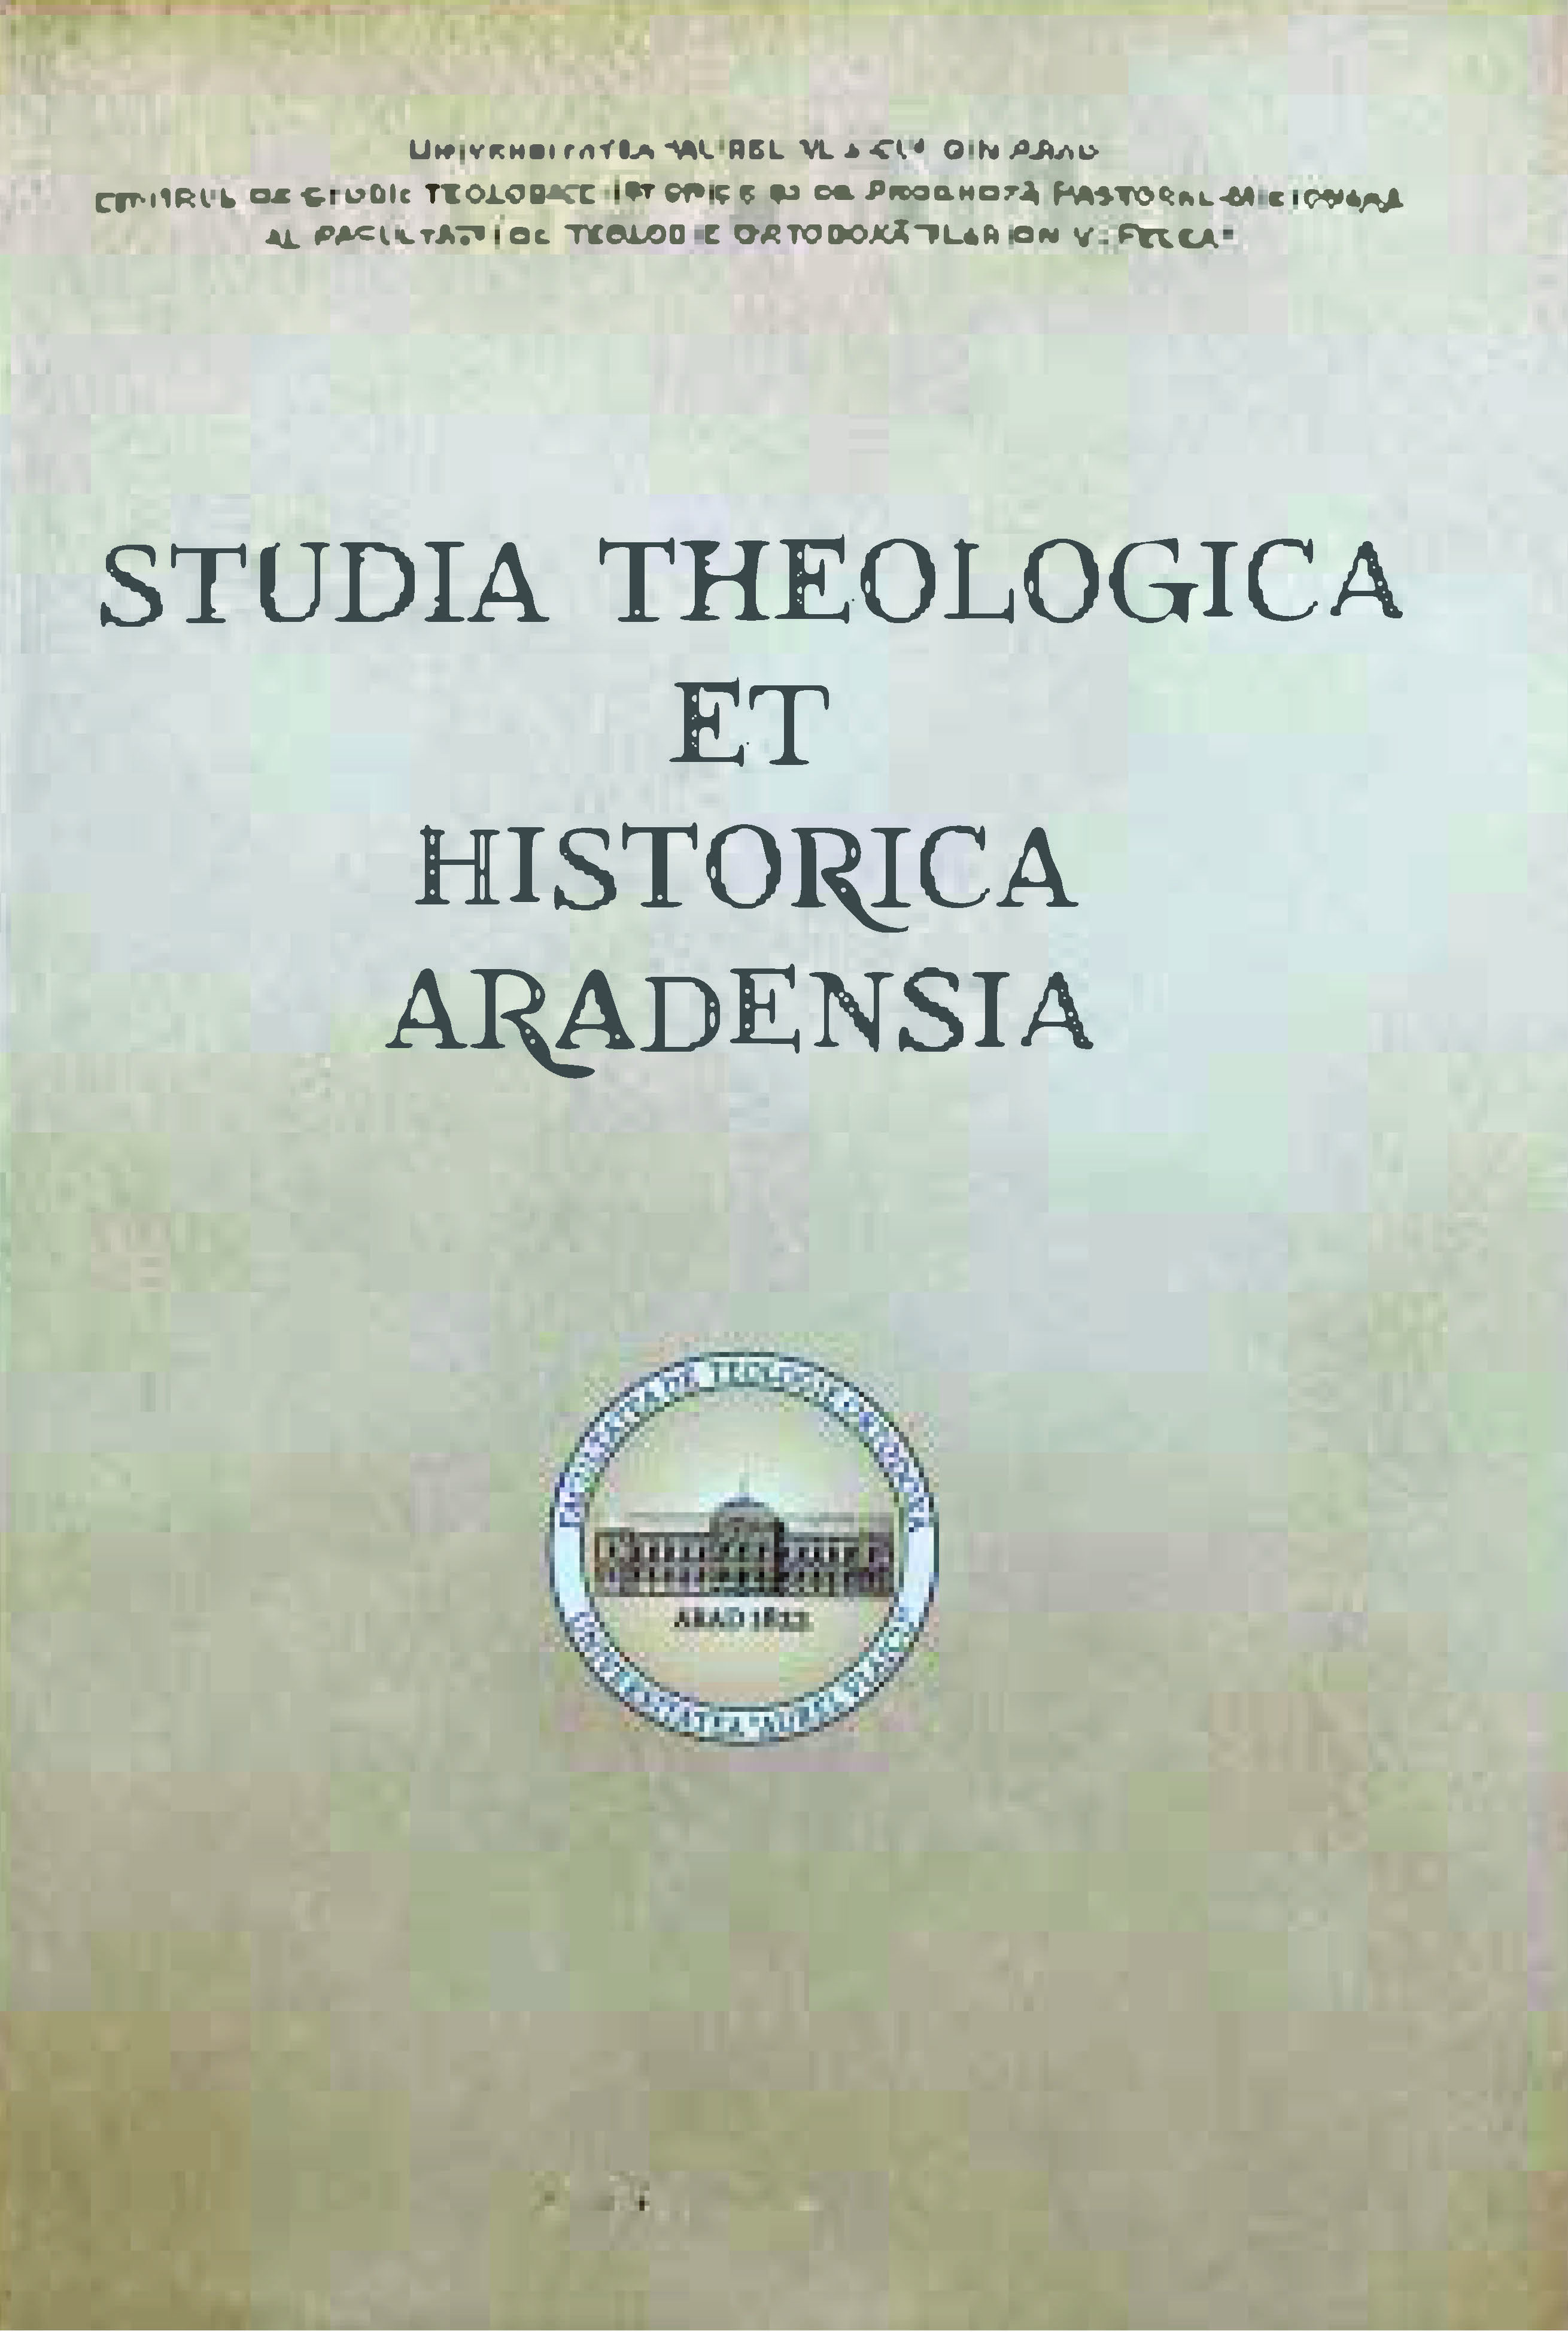 ARCHPOPE SIMION BICA (1812-1888), NOTABLE GRADUATE OF THE THEOLOGICAL INSTITUTE IN ARAD Cover Image